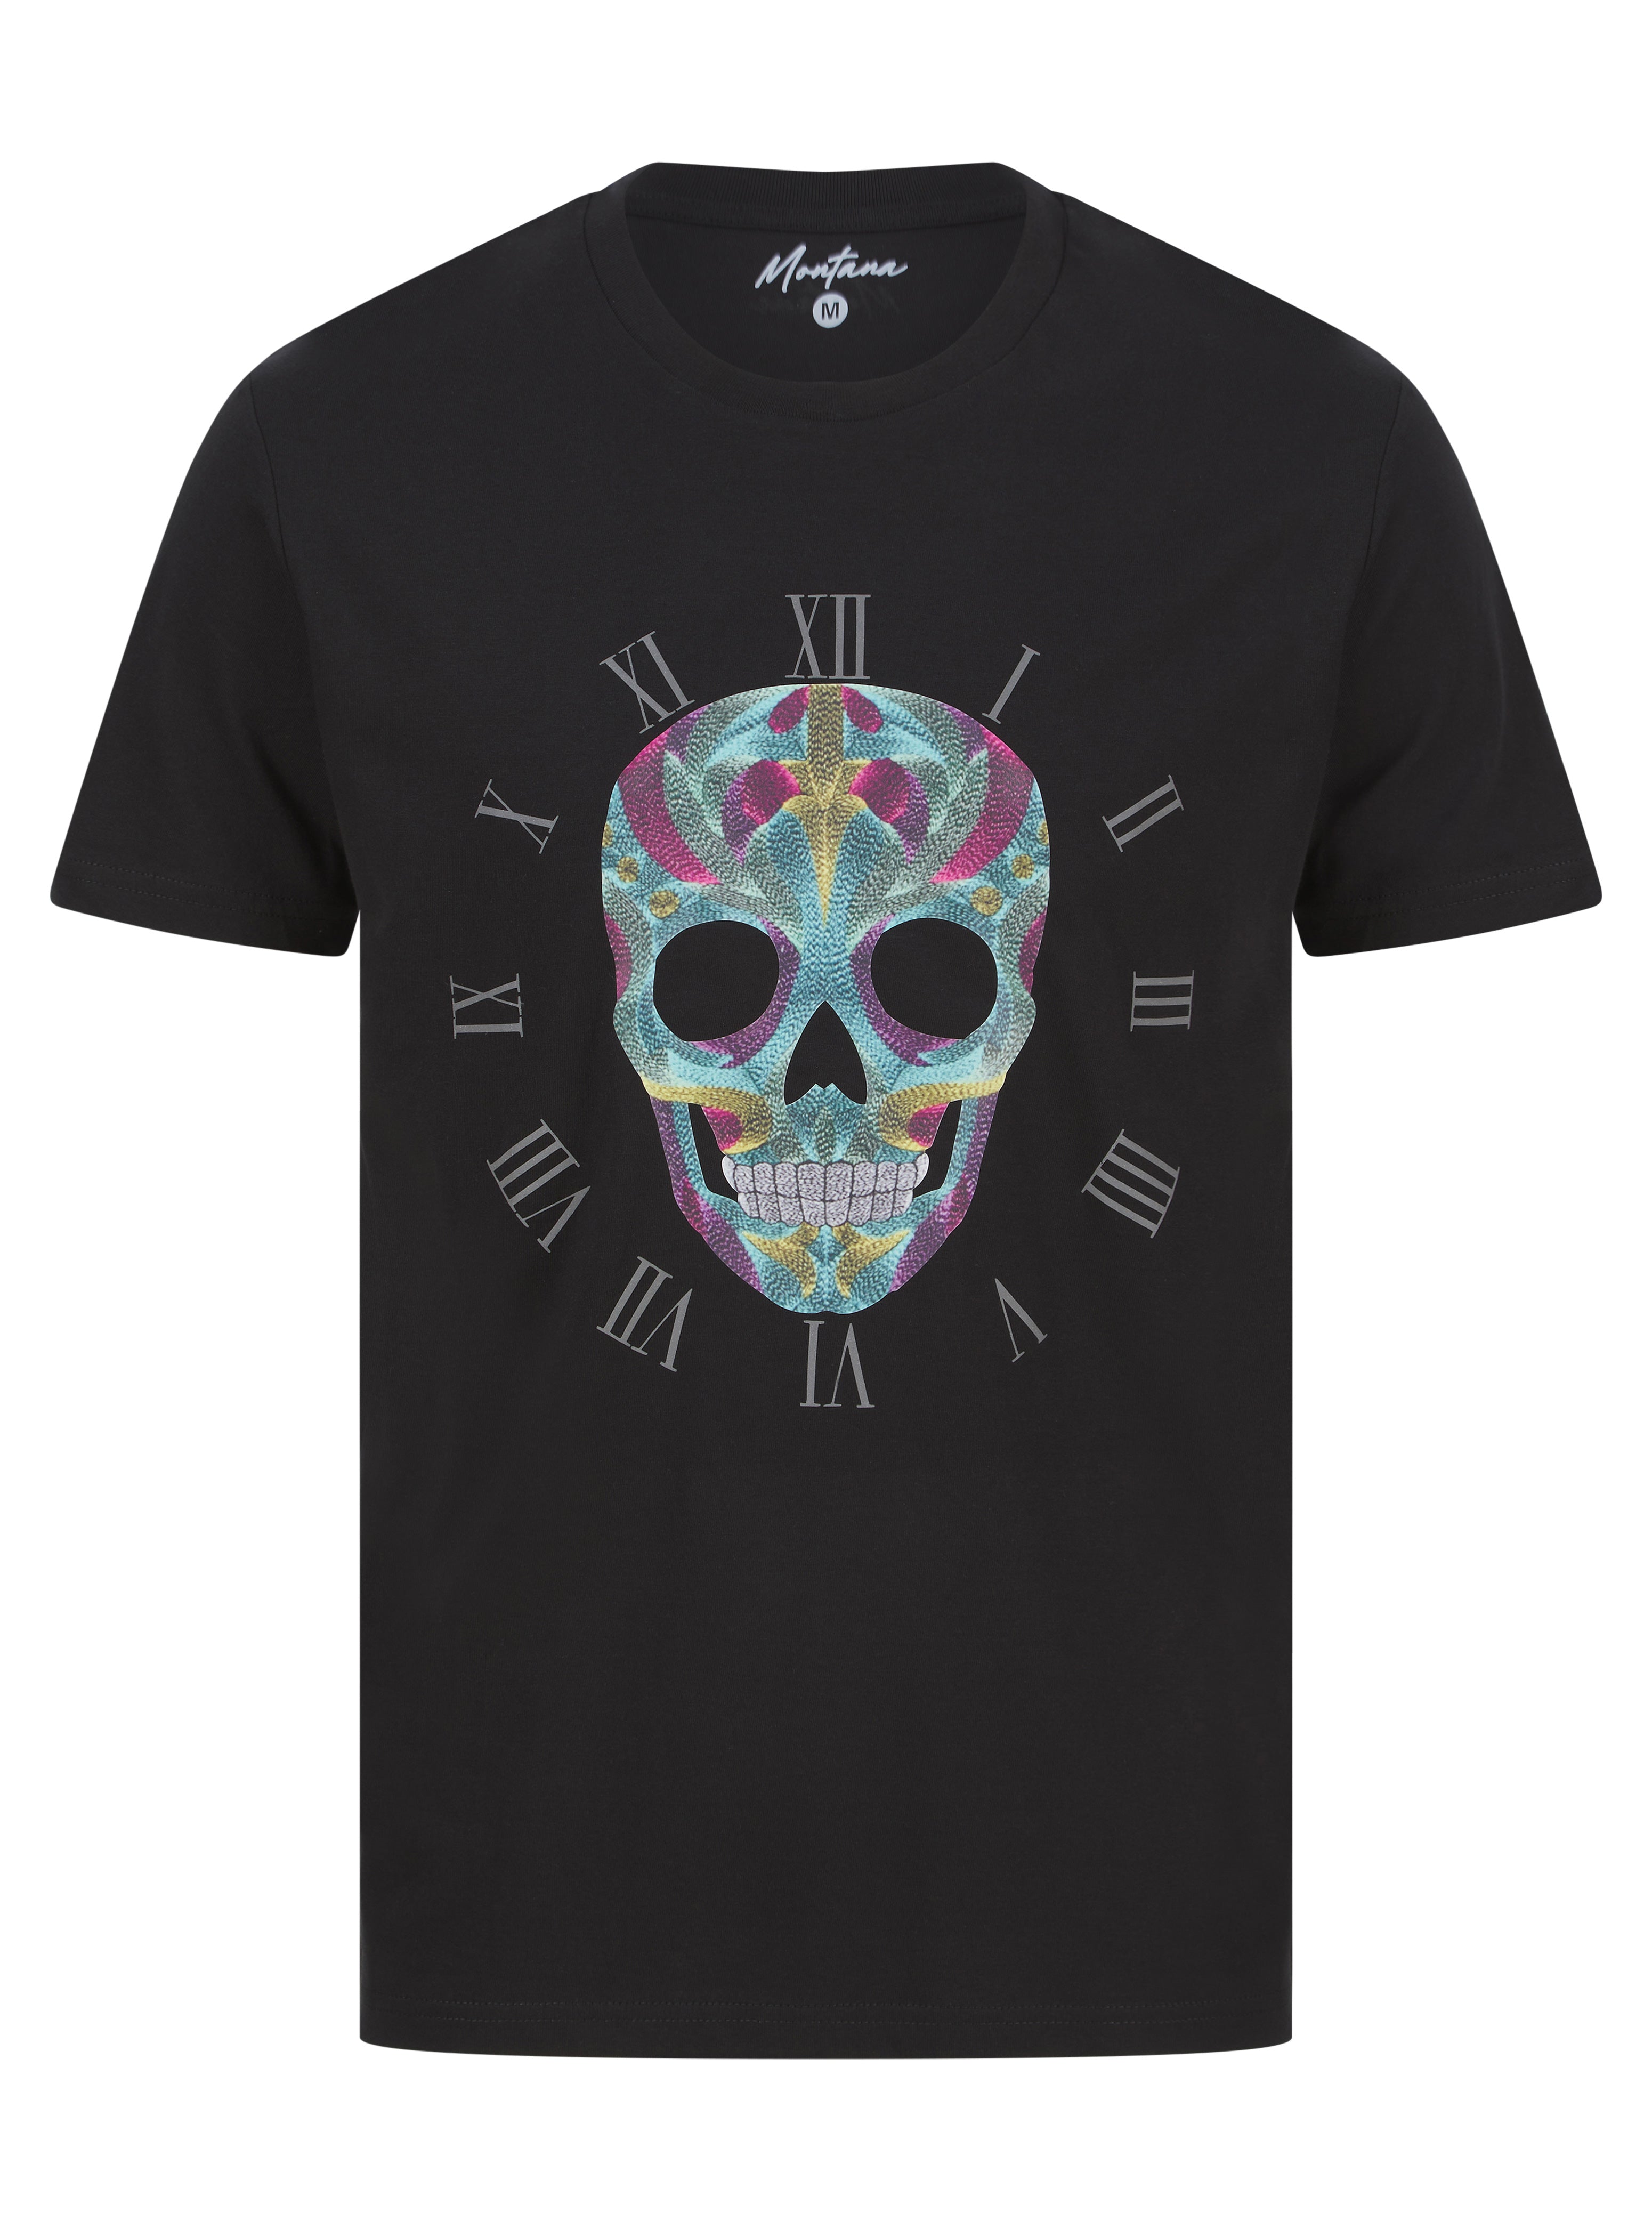 Load image into Gallery viewer, Montana Skull T Shirt Black
